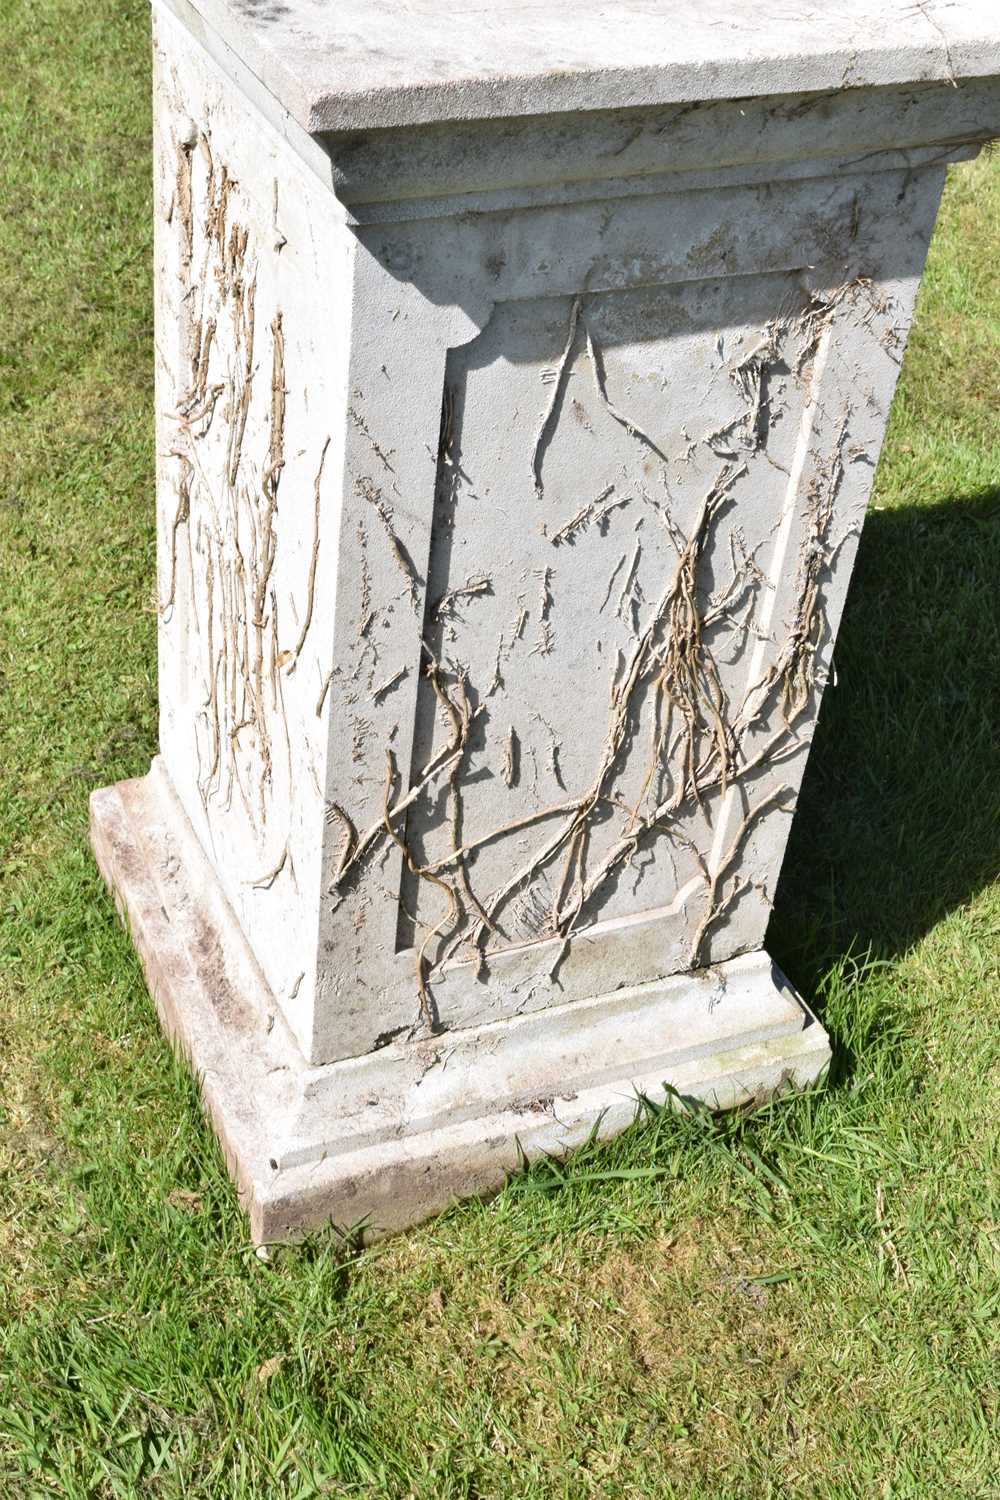 Composition stone garden urn and pedestal - Image 8 of 11